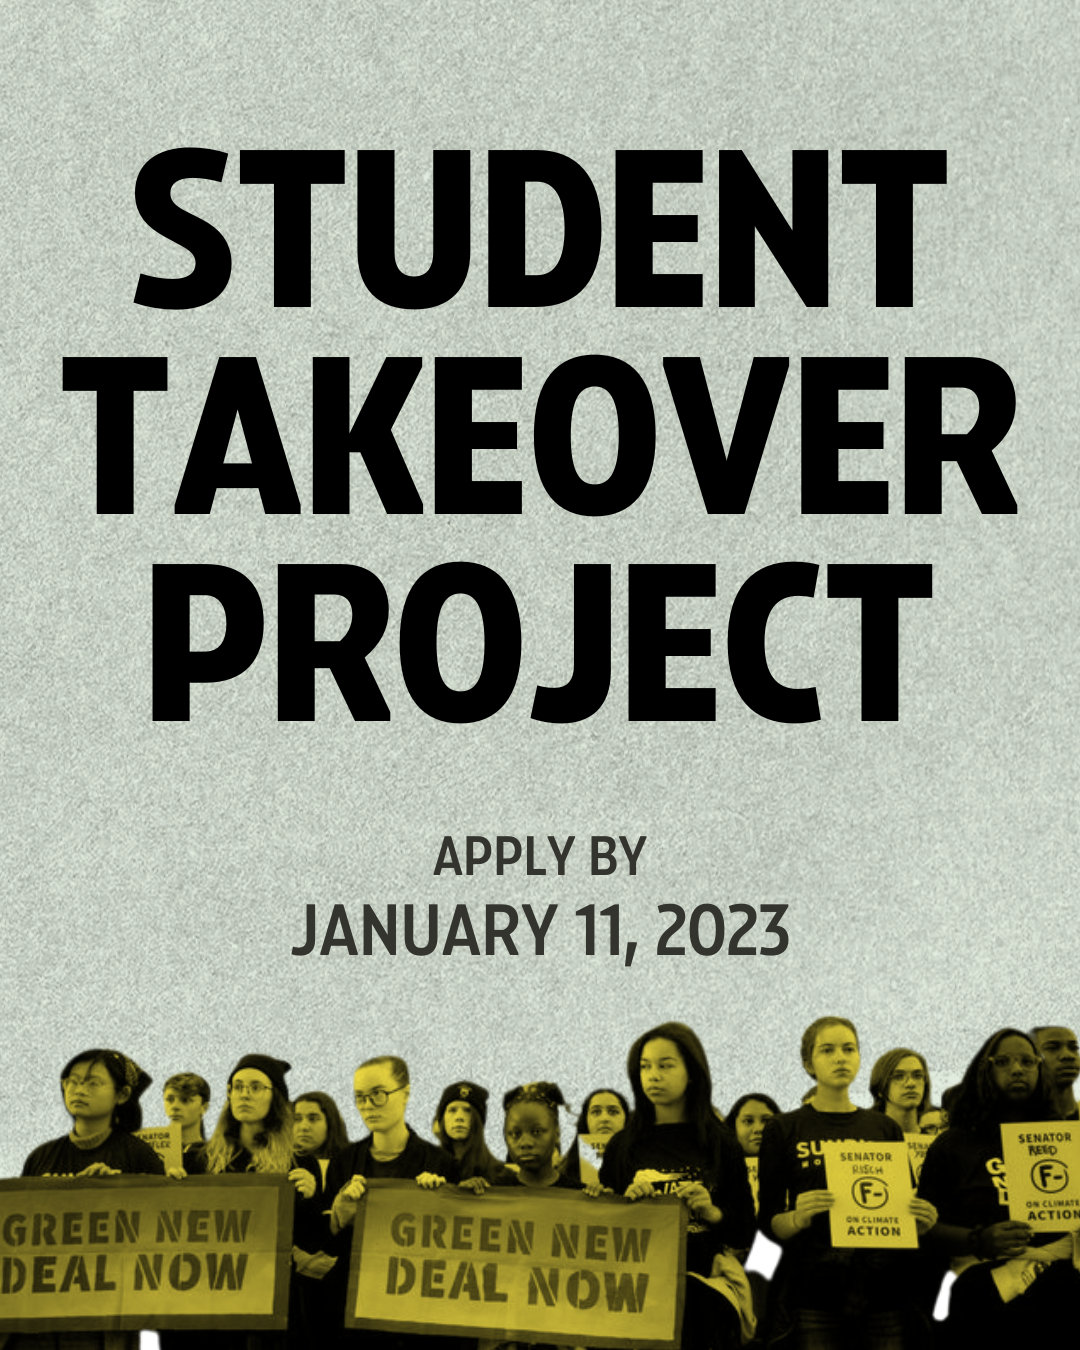 Student Takeover Project Apply by January 11, 2023